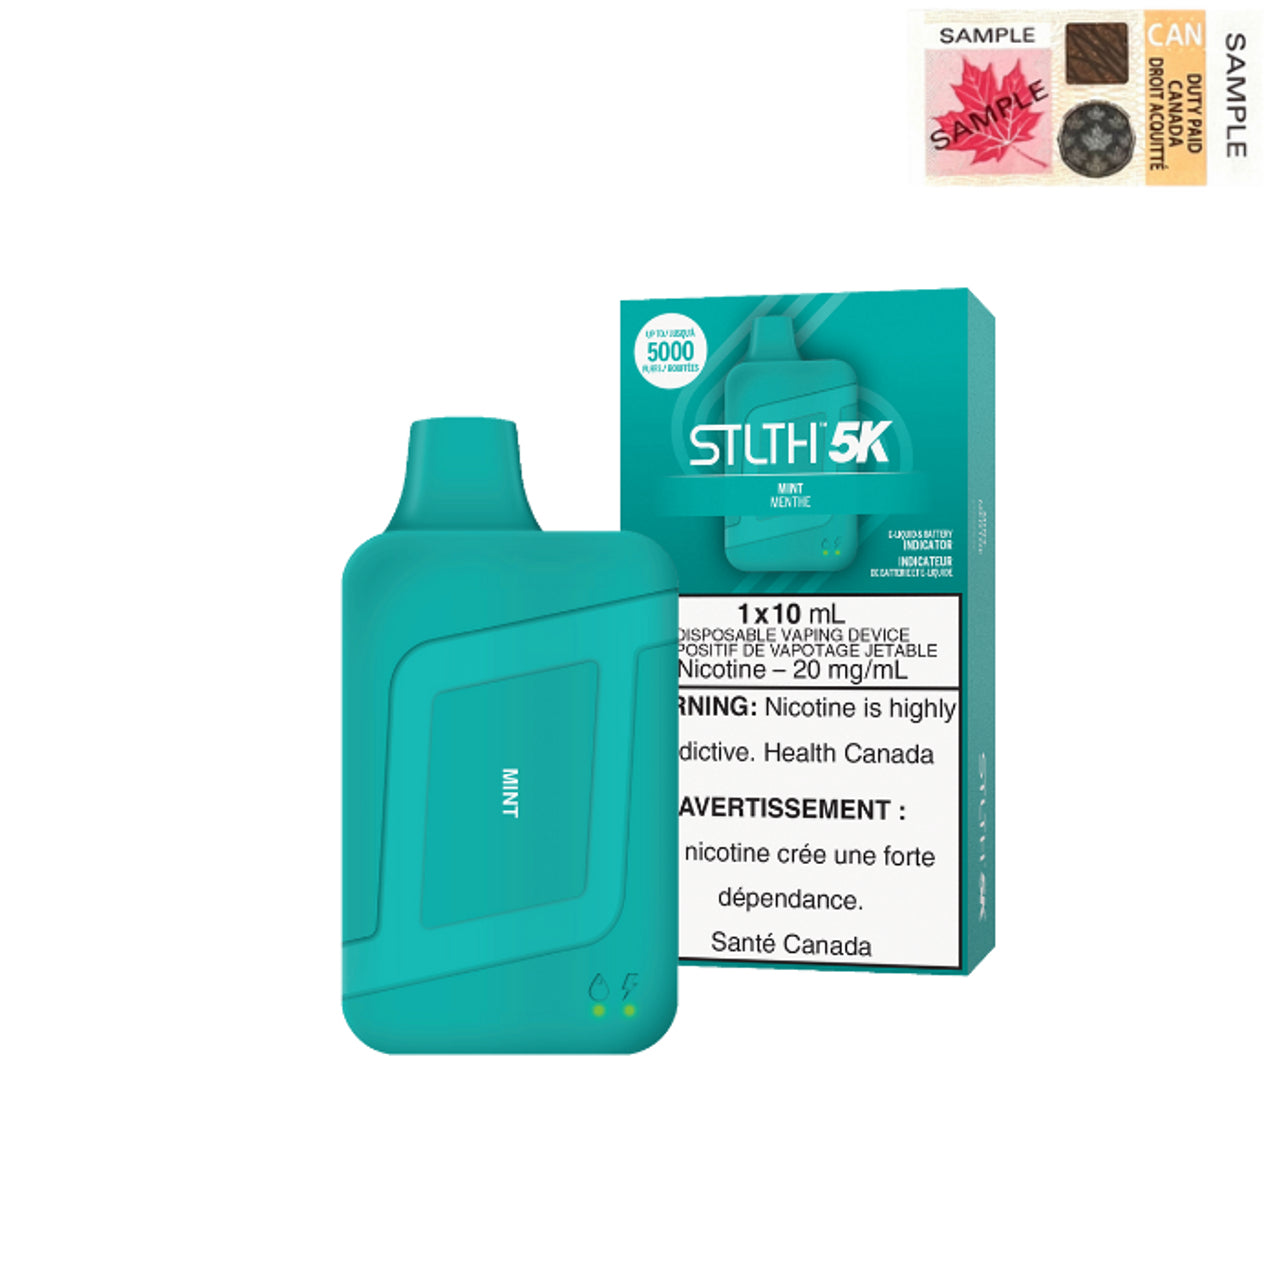 MINT - STLTH 5K - 20mg - 5ct - EXCISED